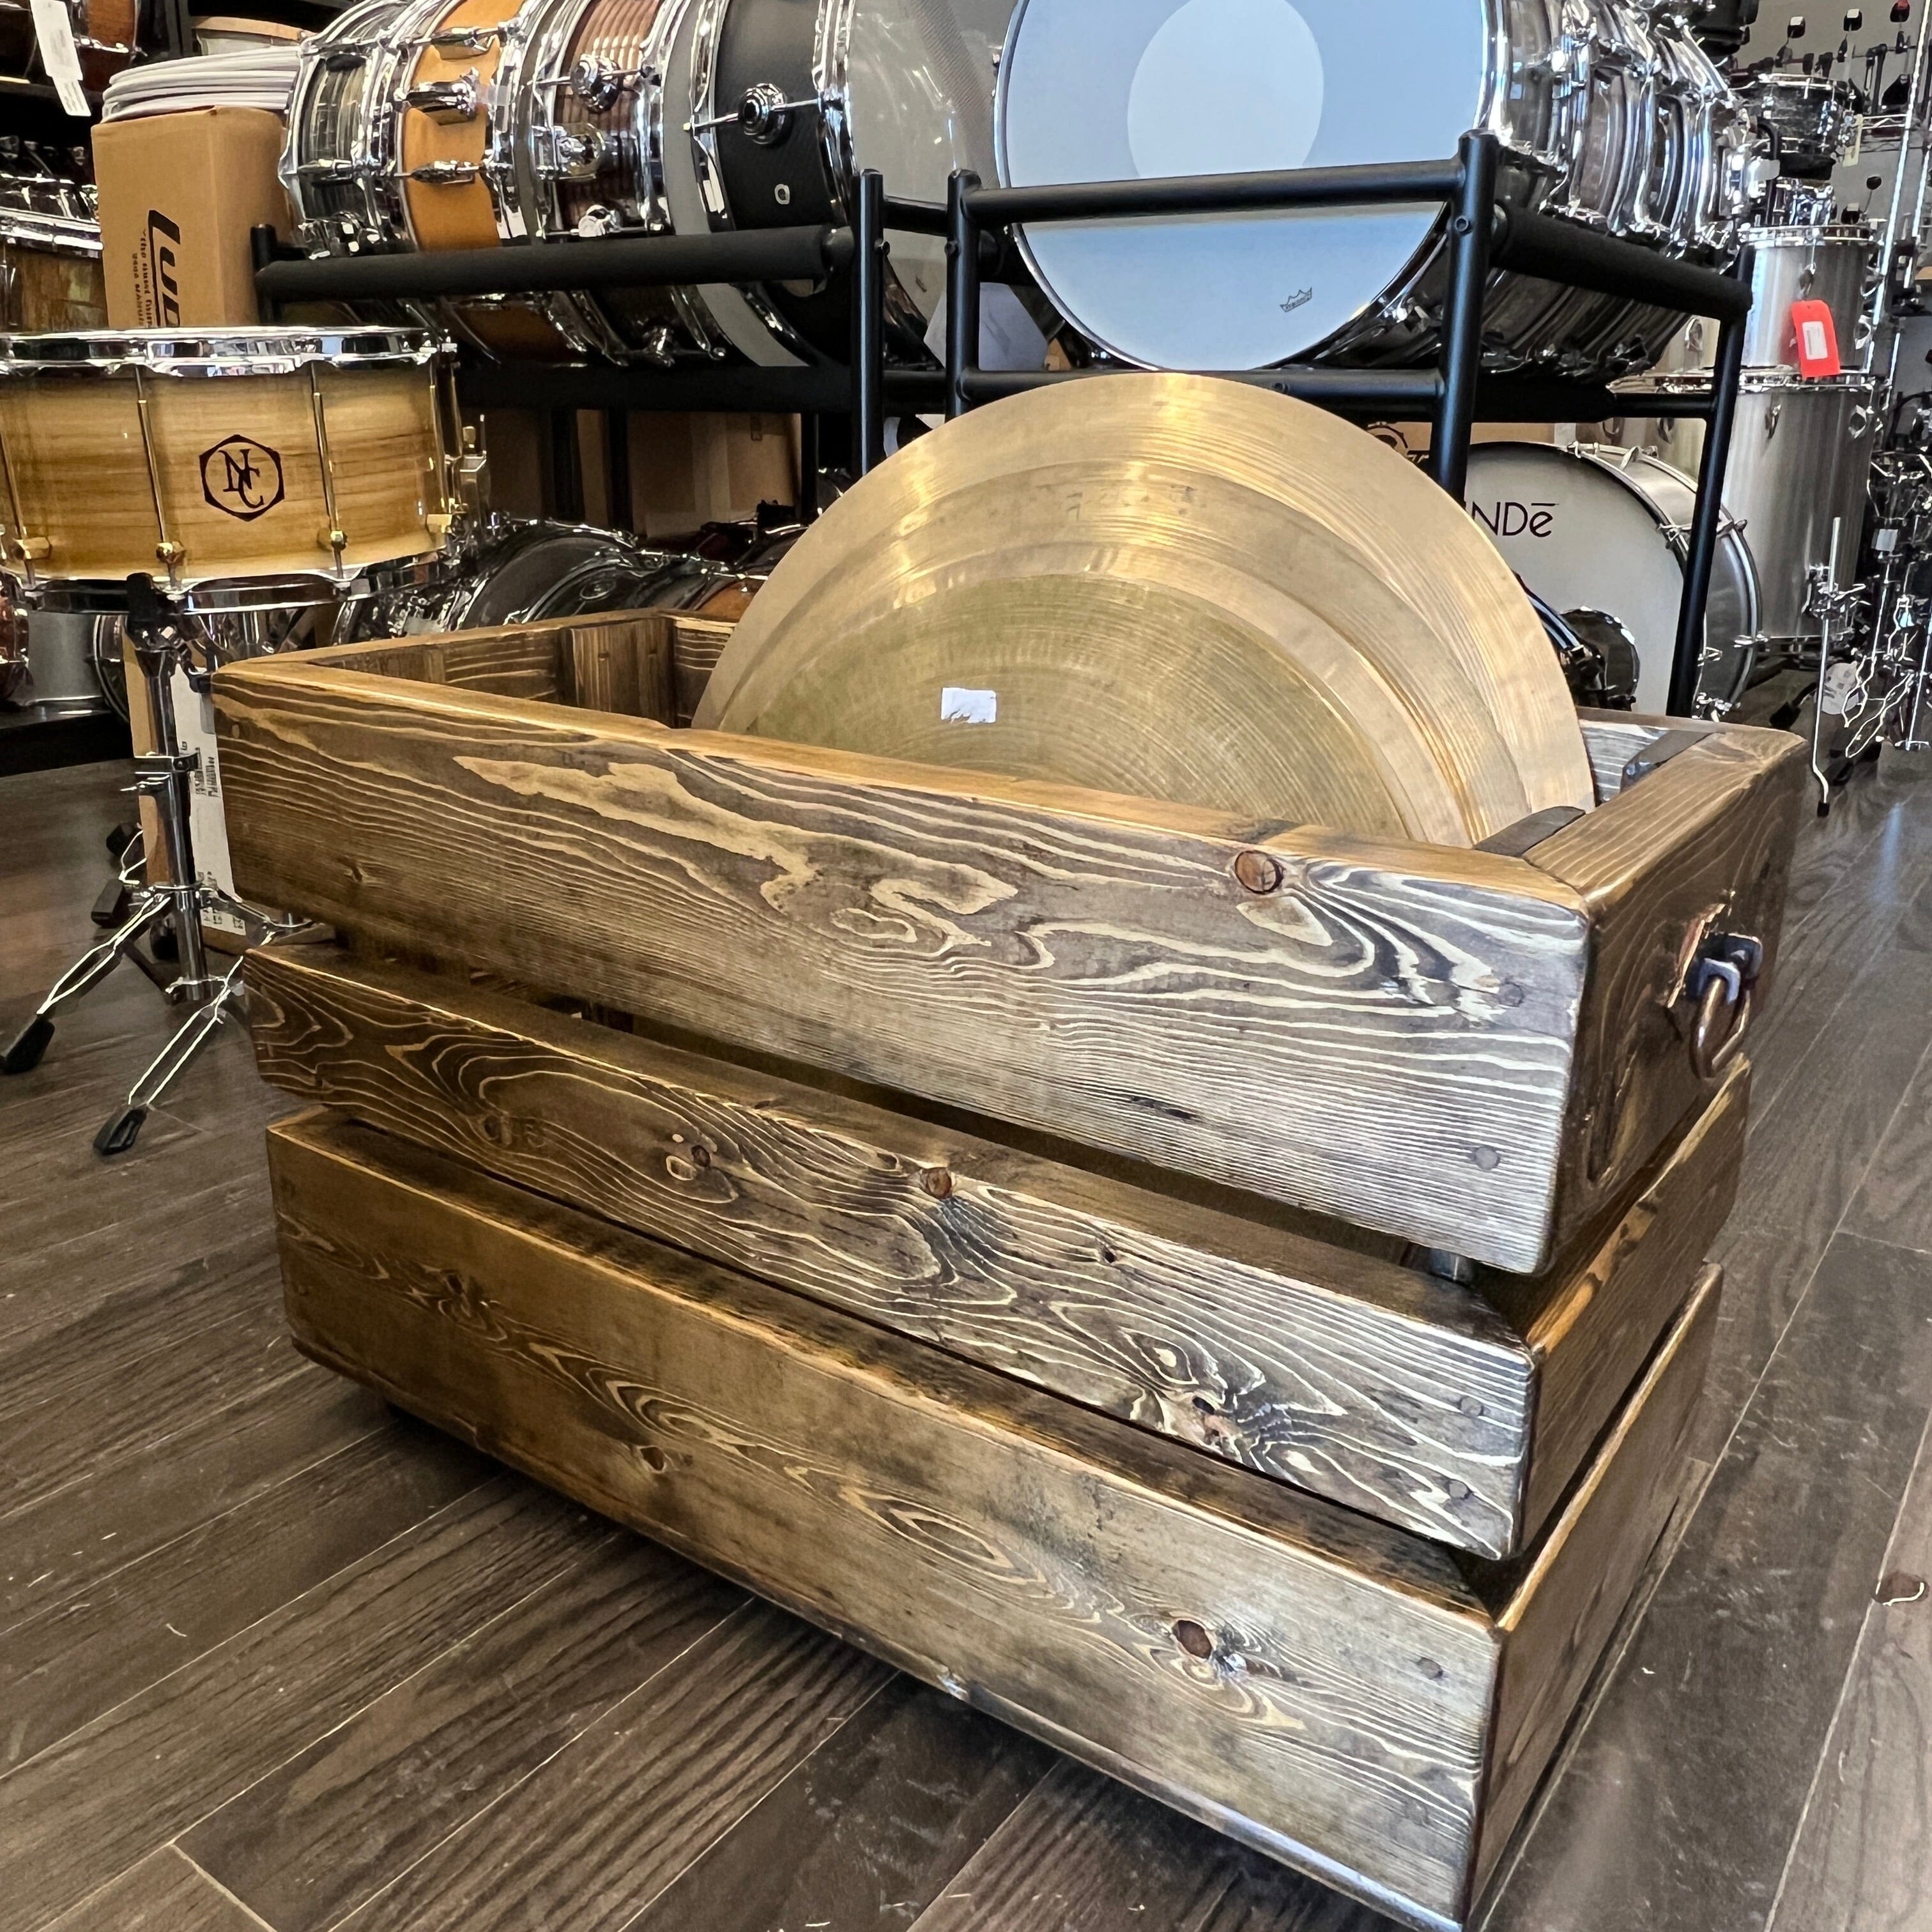 Custom Cymbal Crates for Storage drum kit Dave's Drum Shop 